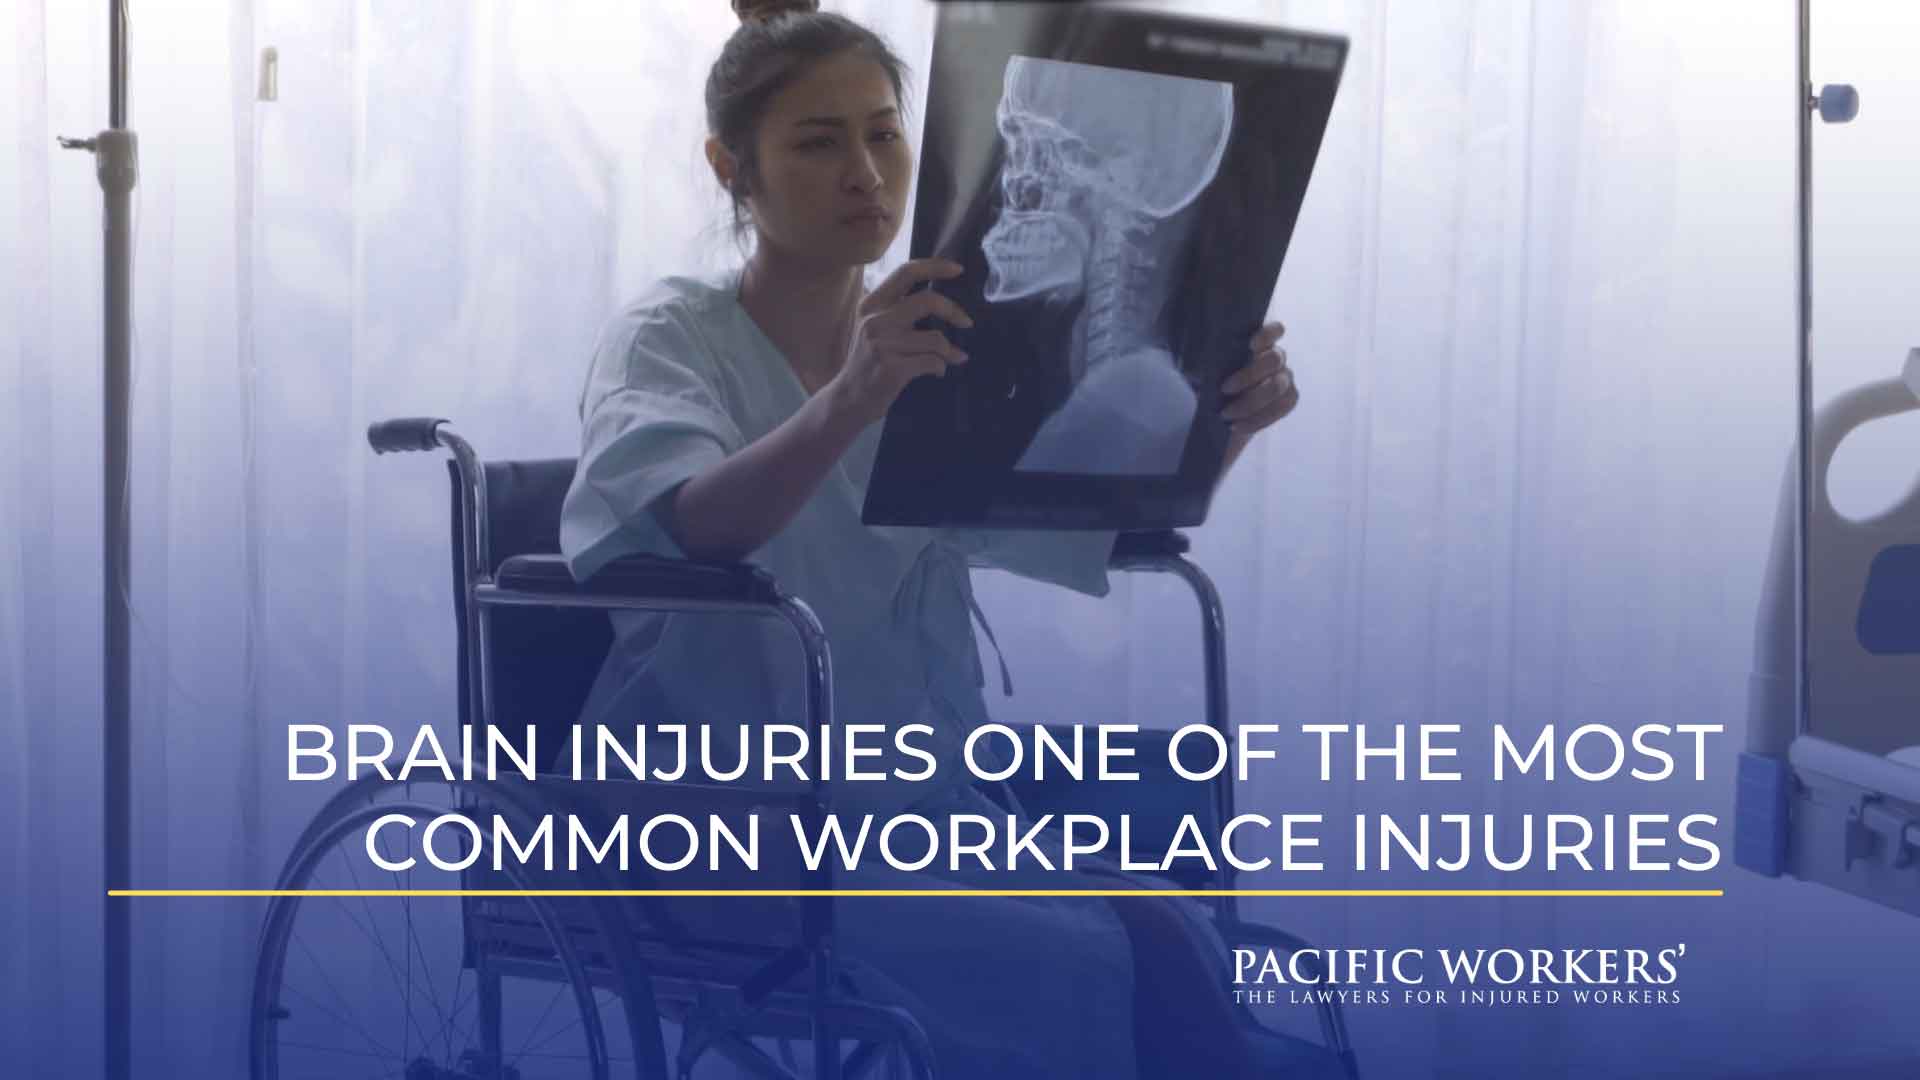 Brain Injuries One of the Most Common Workplace Injuries